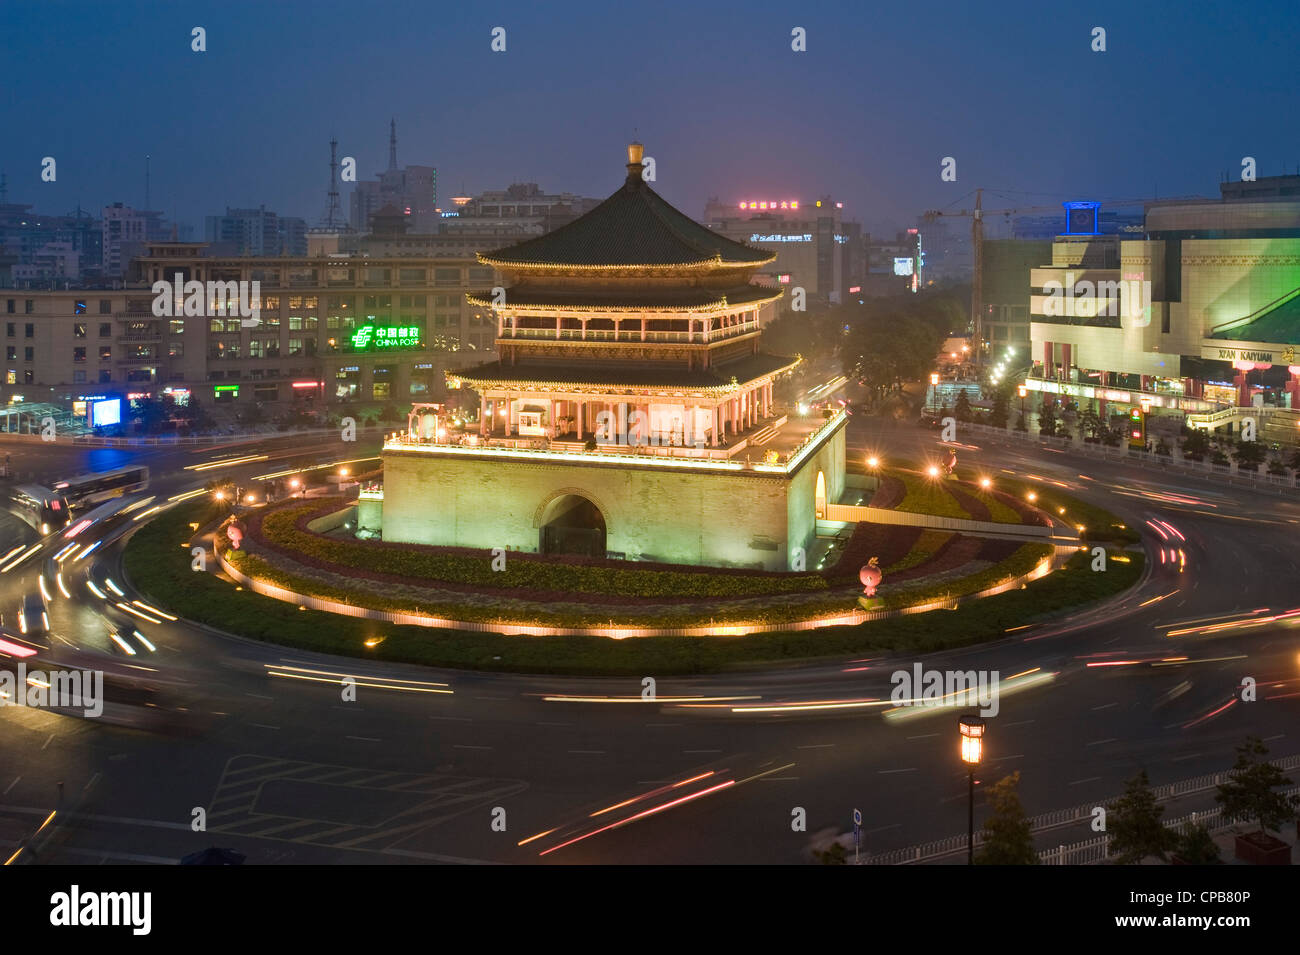 The Bell Tower in Xian with slow shutter speed for motion blur of the traffic at dusk/evening. Stock Photo